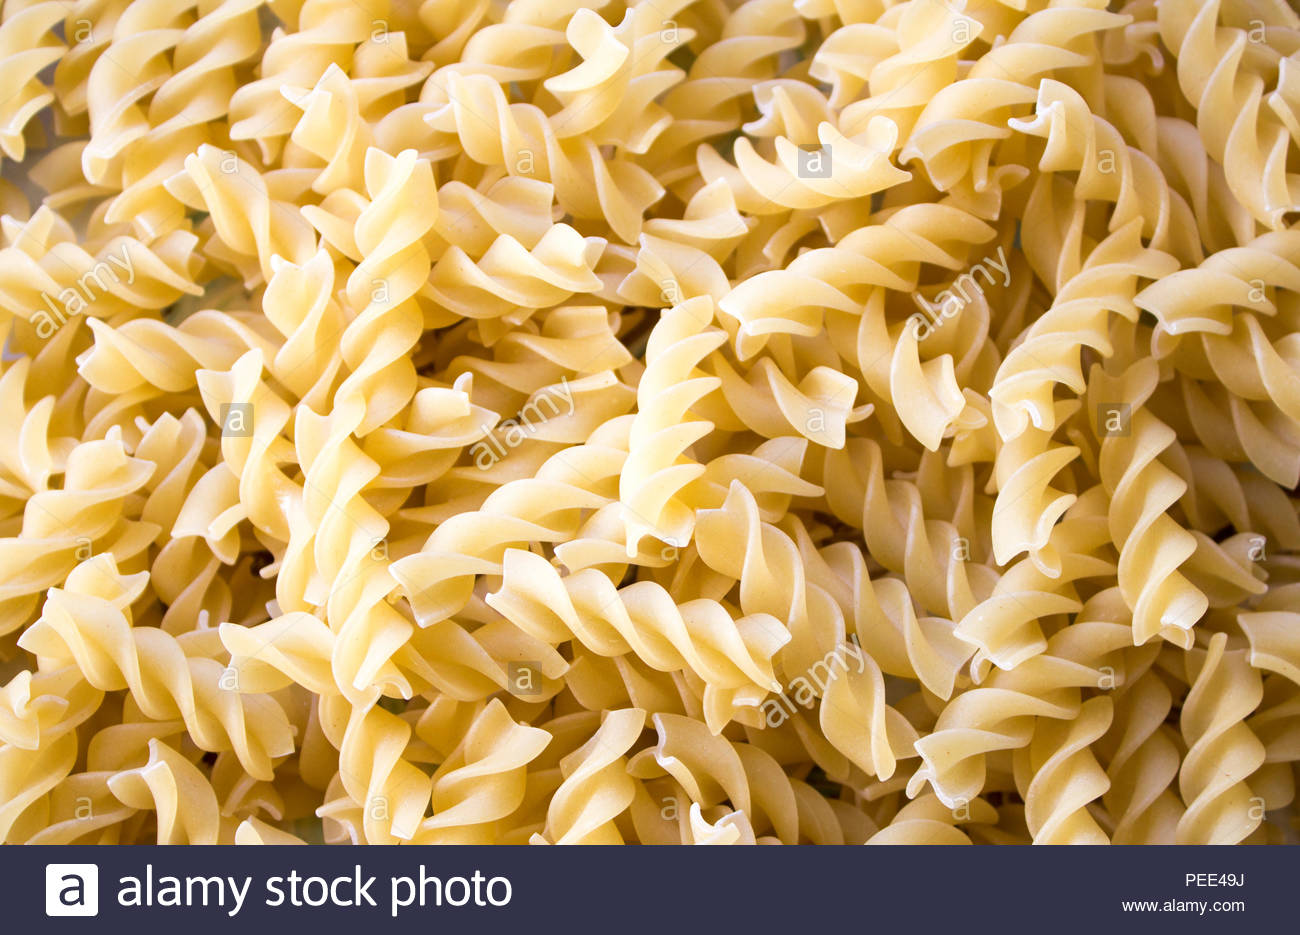 Dry Pasta Background Healthy Food Yellow Stock Photo